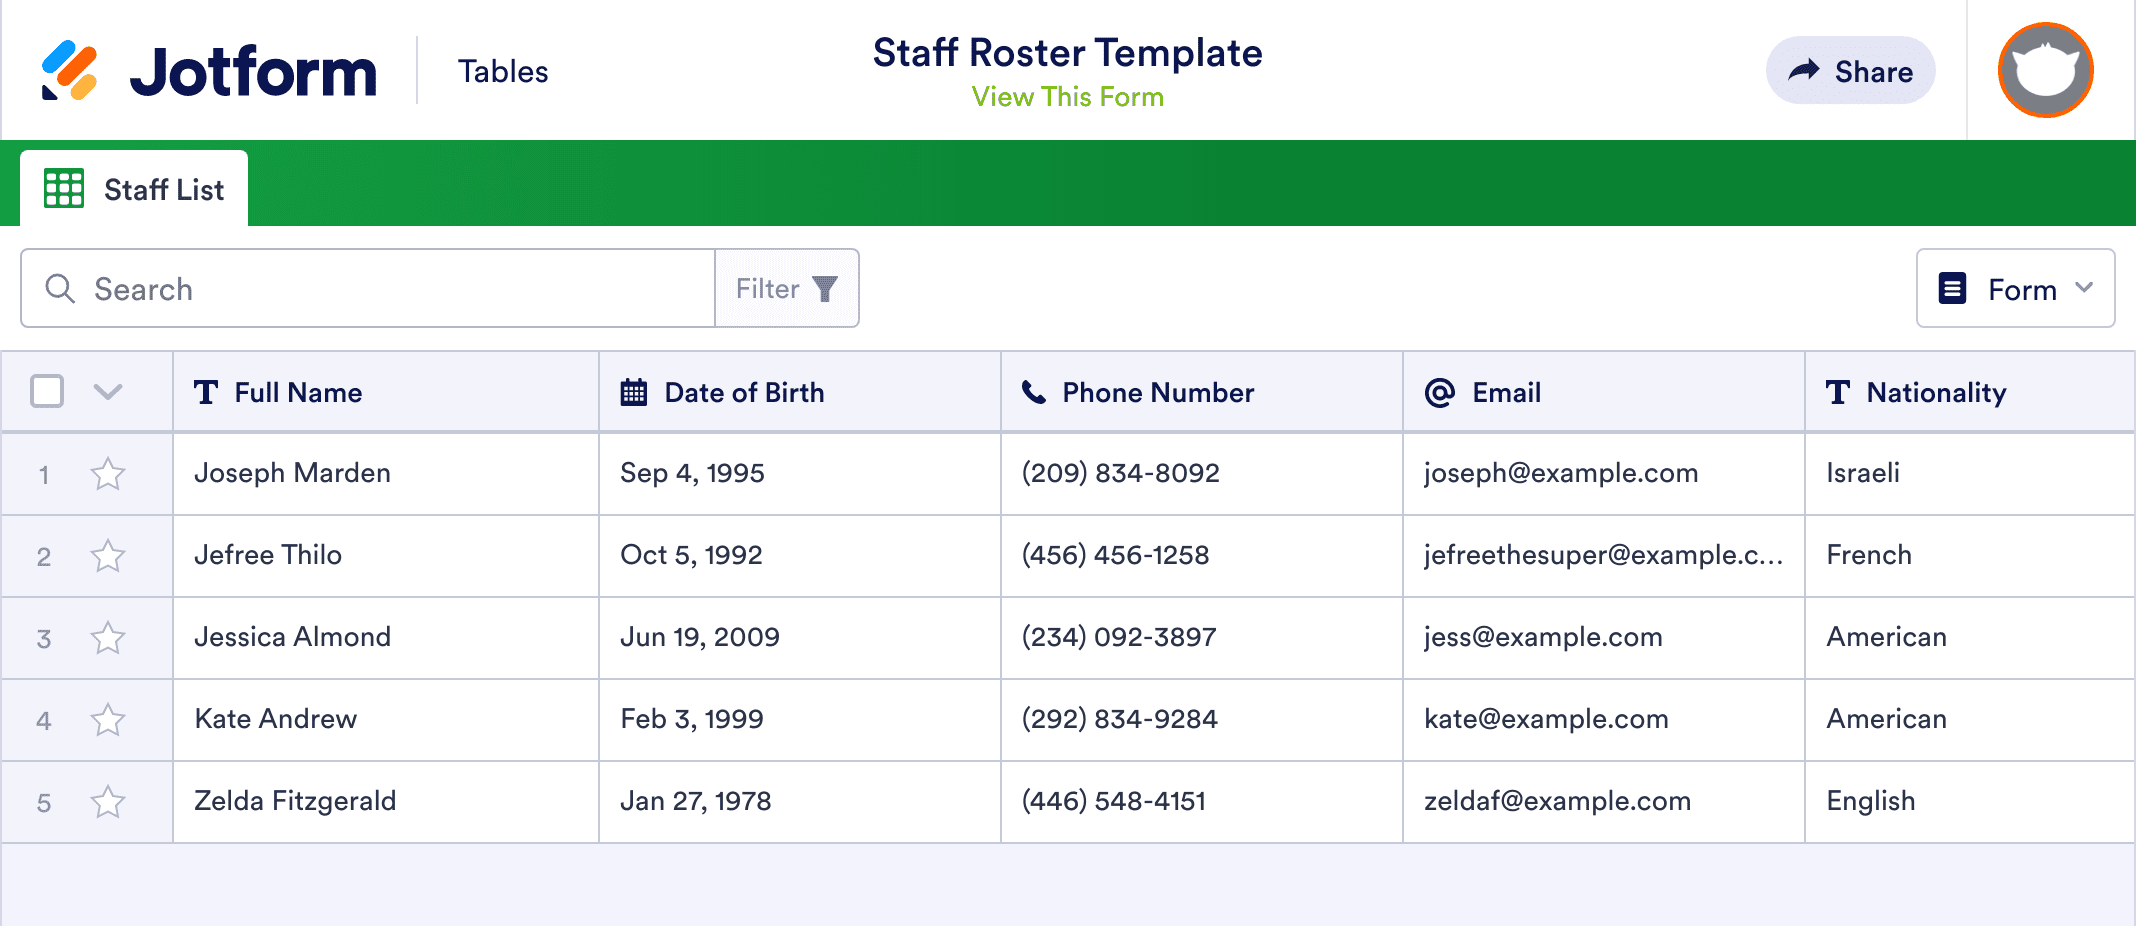 staff-roster-template-jotform-tables